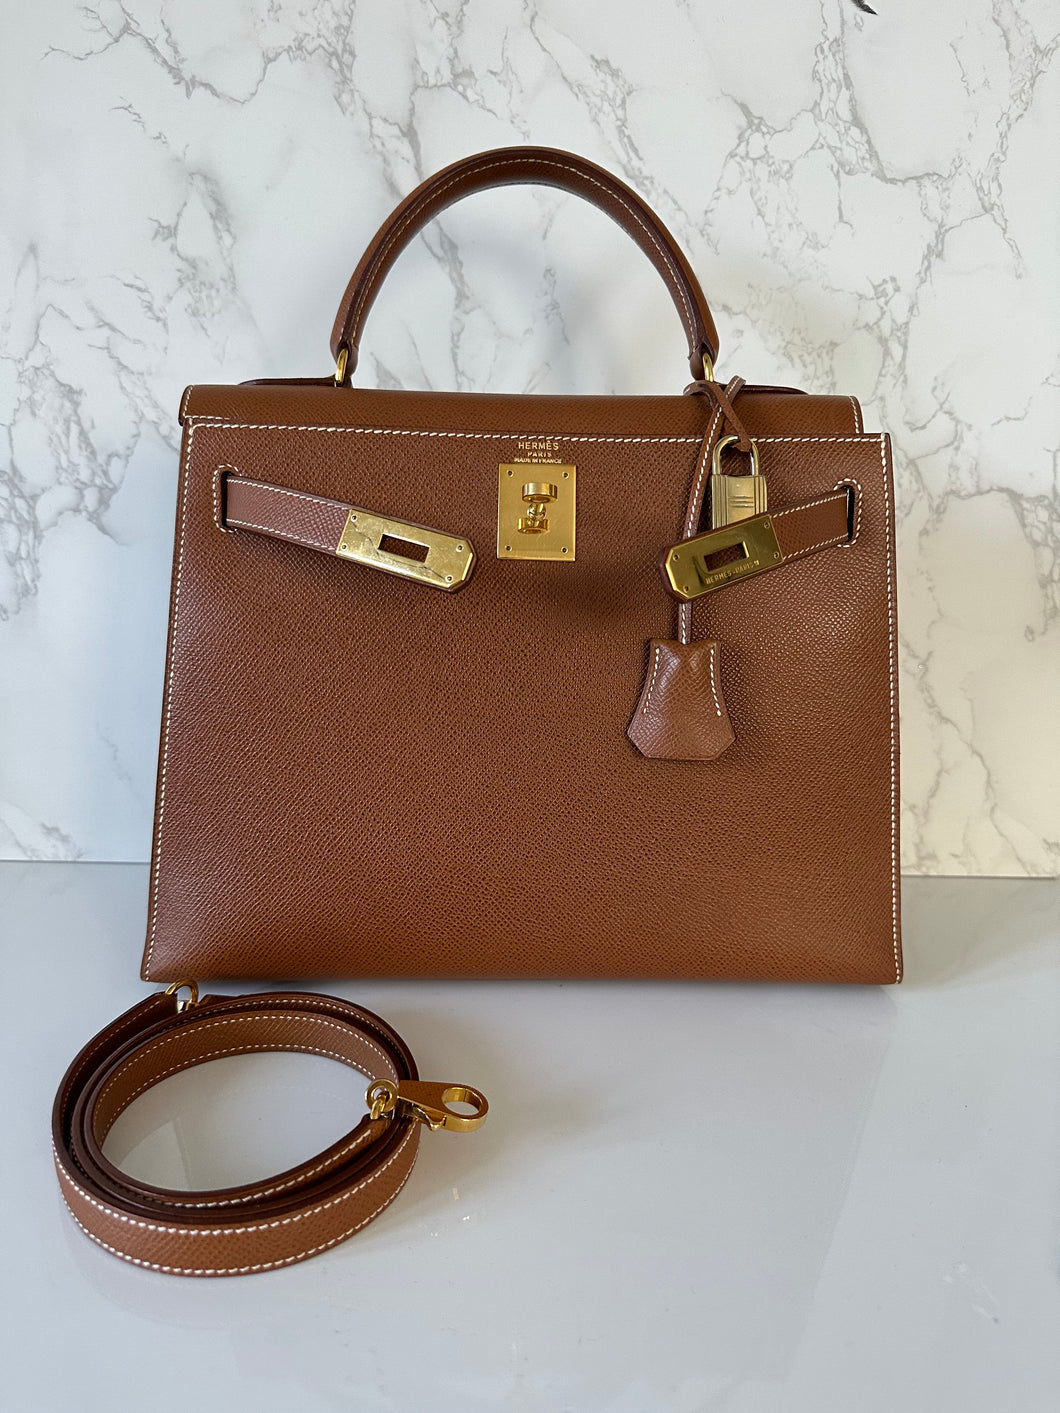 Authentic preowned Hermes Kelly 28 gold courchevel/epsom